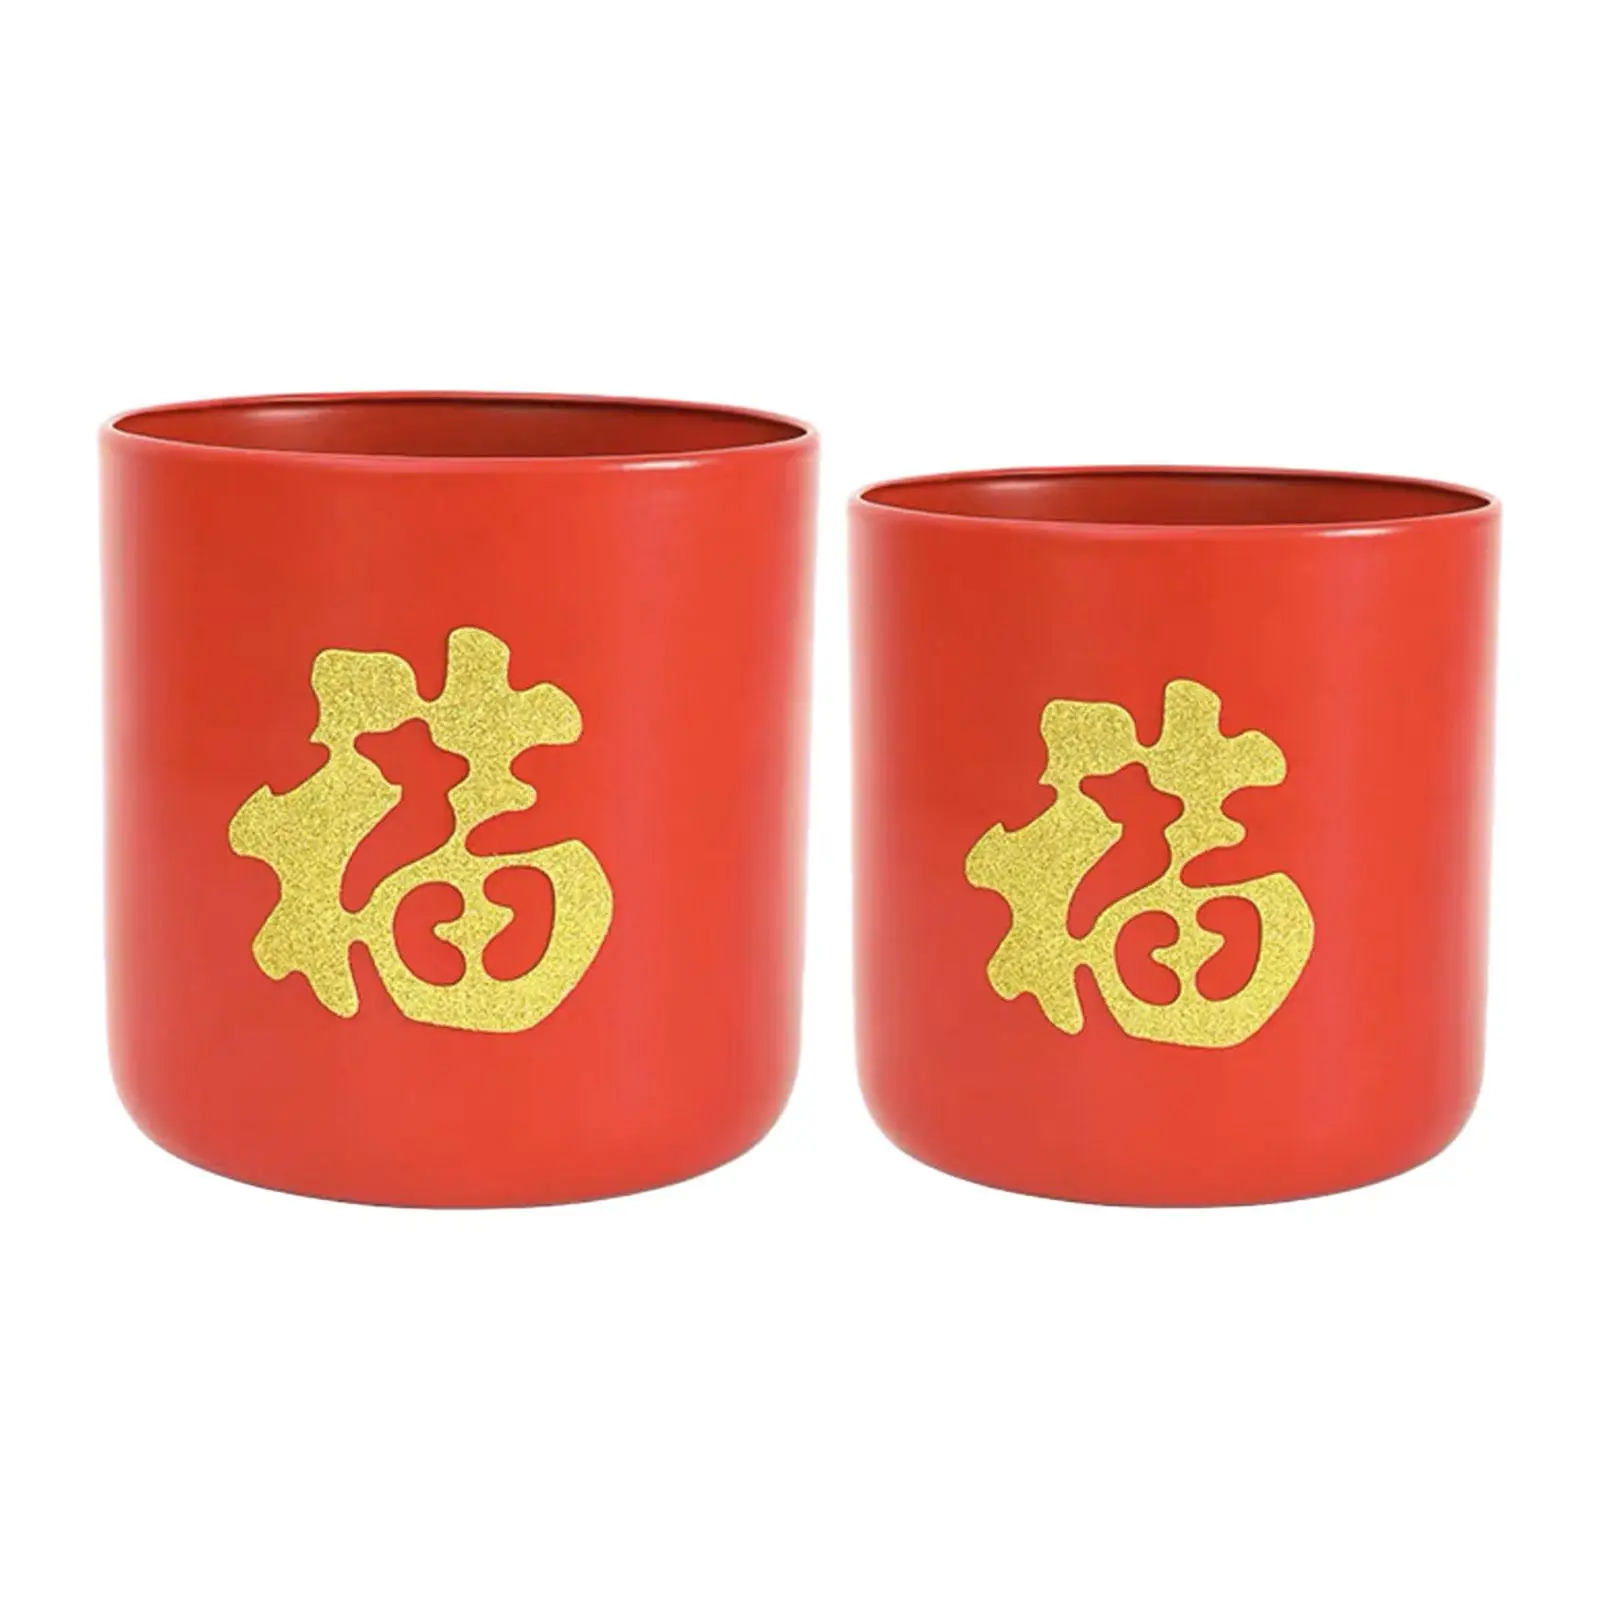 2 Pieces Chinese New Year Decoration Flower Pot Multipurpose Fu Character Vase Decor for Home Office Shelf Living Room Decor